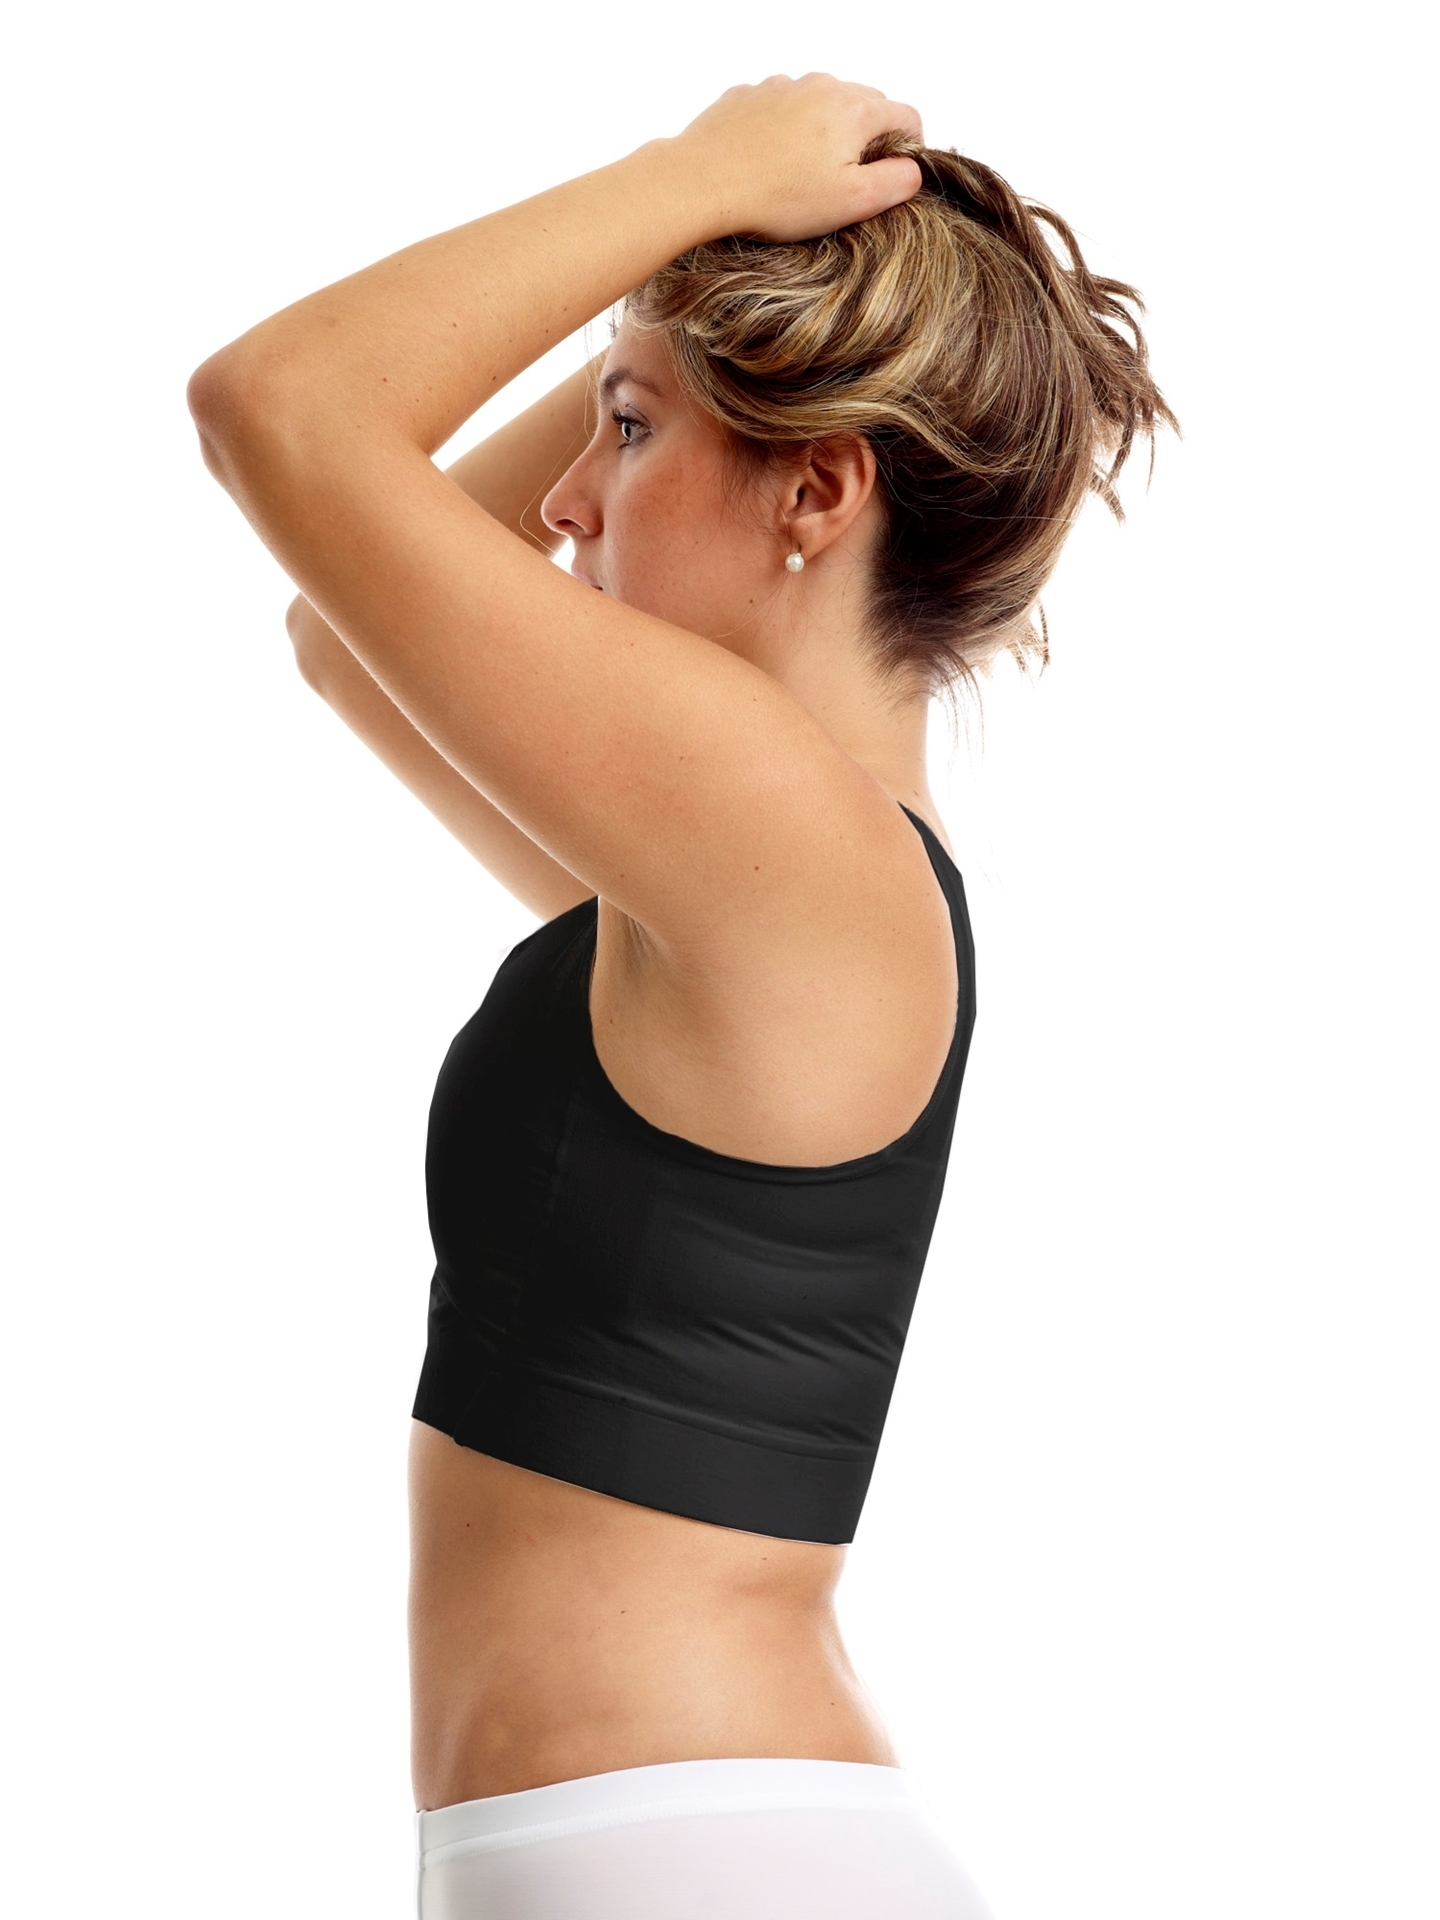 Tompik Women's Quick Dry Slip On Sports Bra Designed with medium  compression to contain the bust